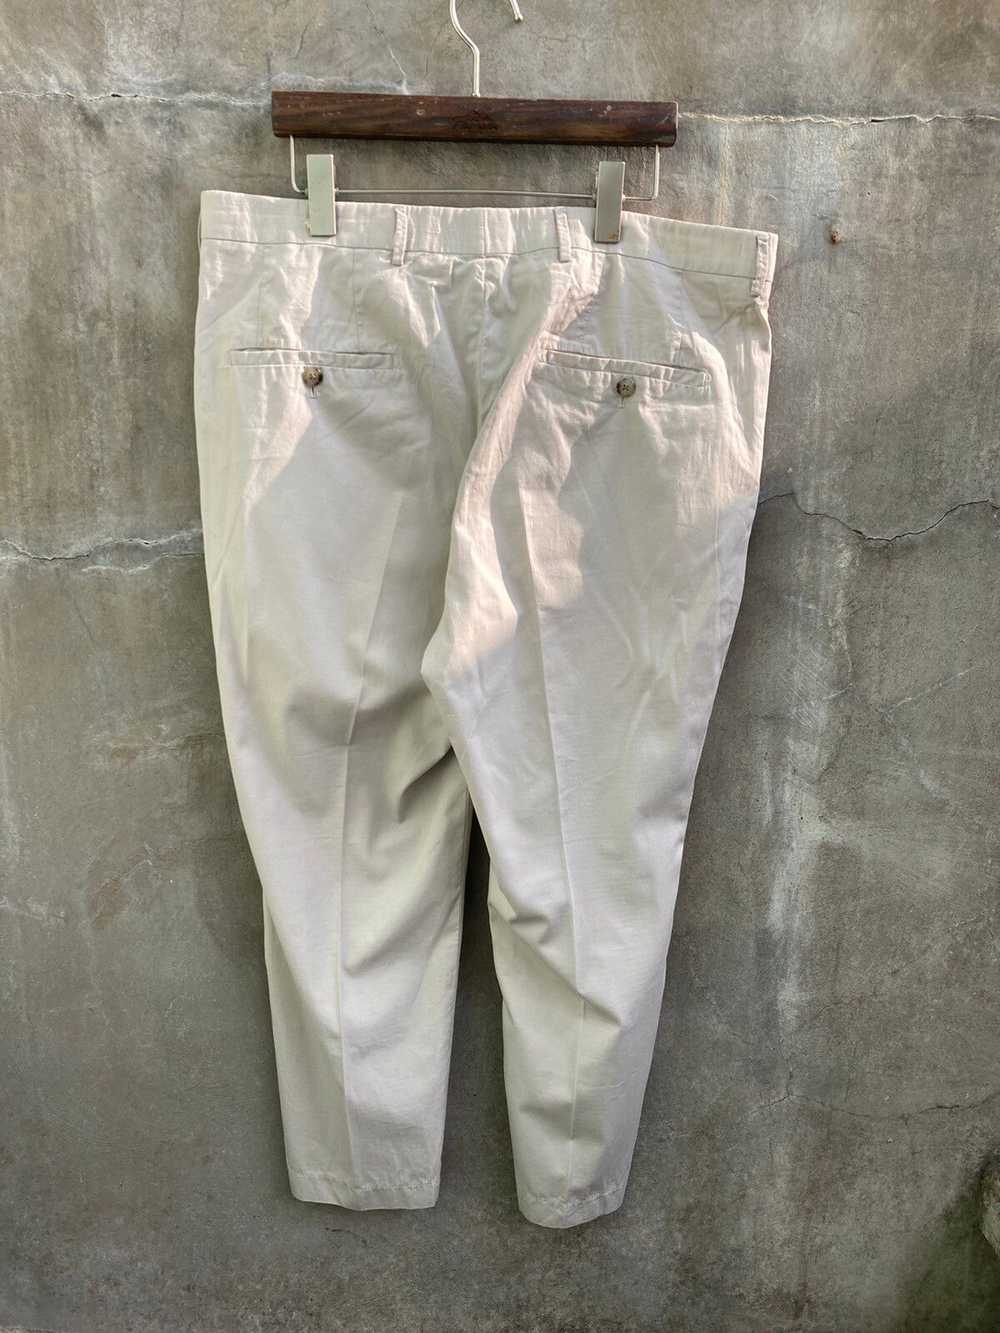 Rick Owens SS19 Babel Oyster Cotton Trousers - image 5